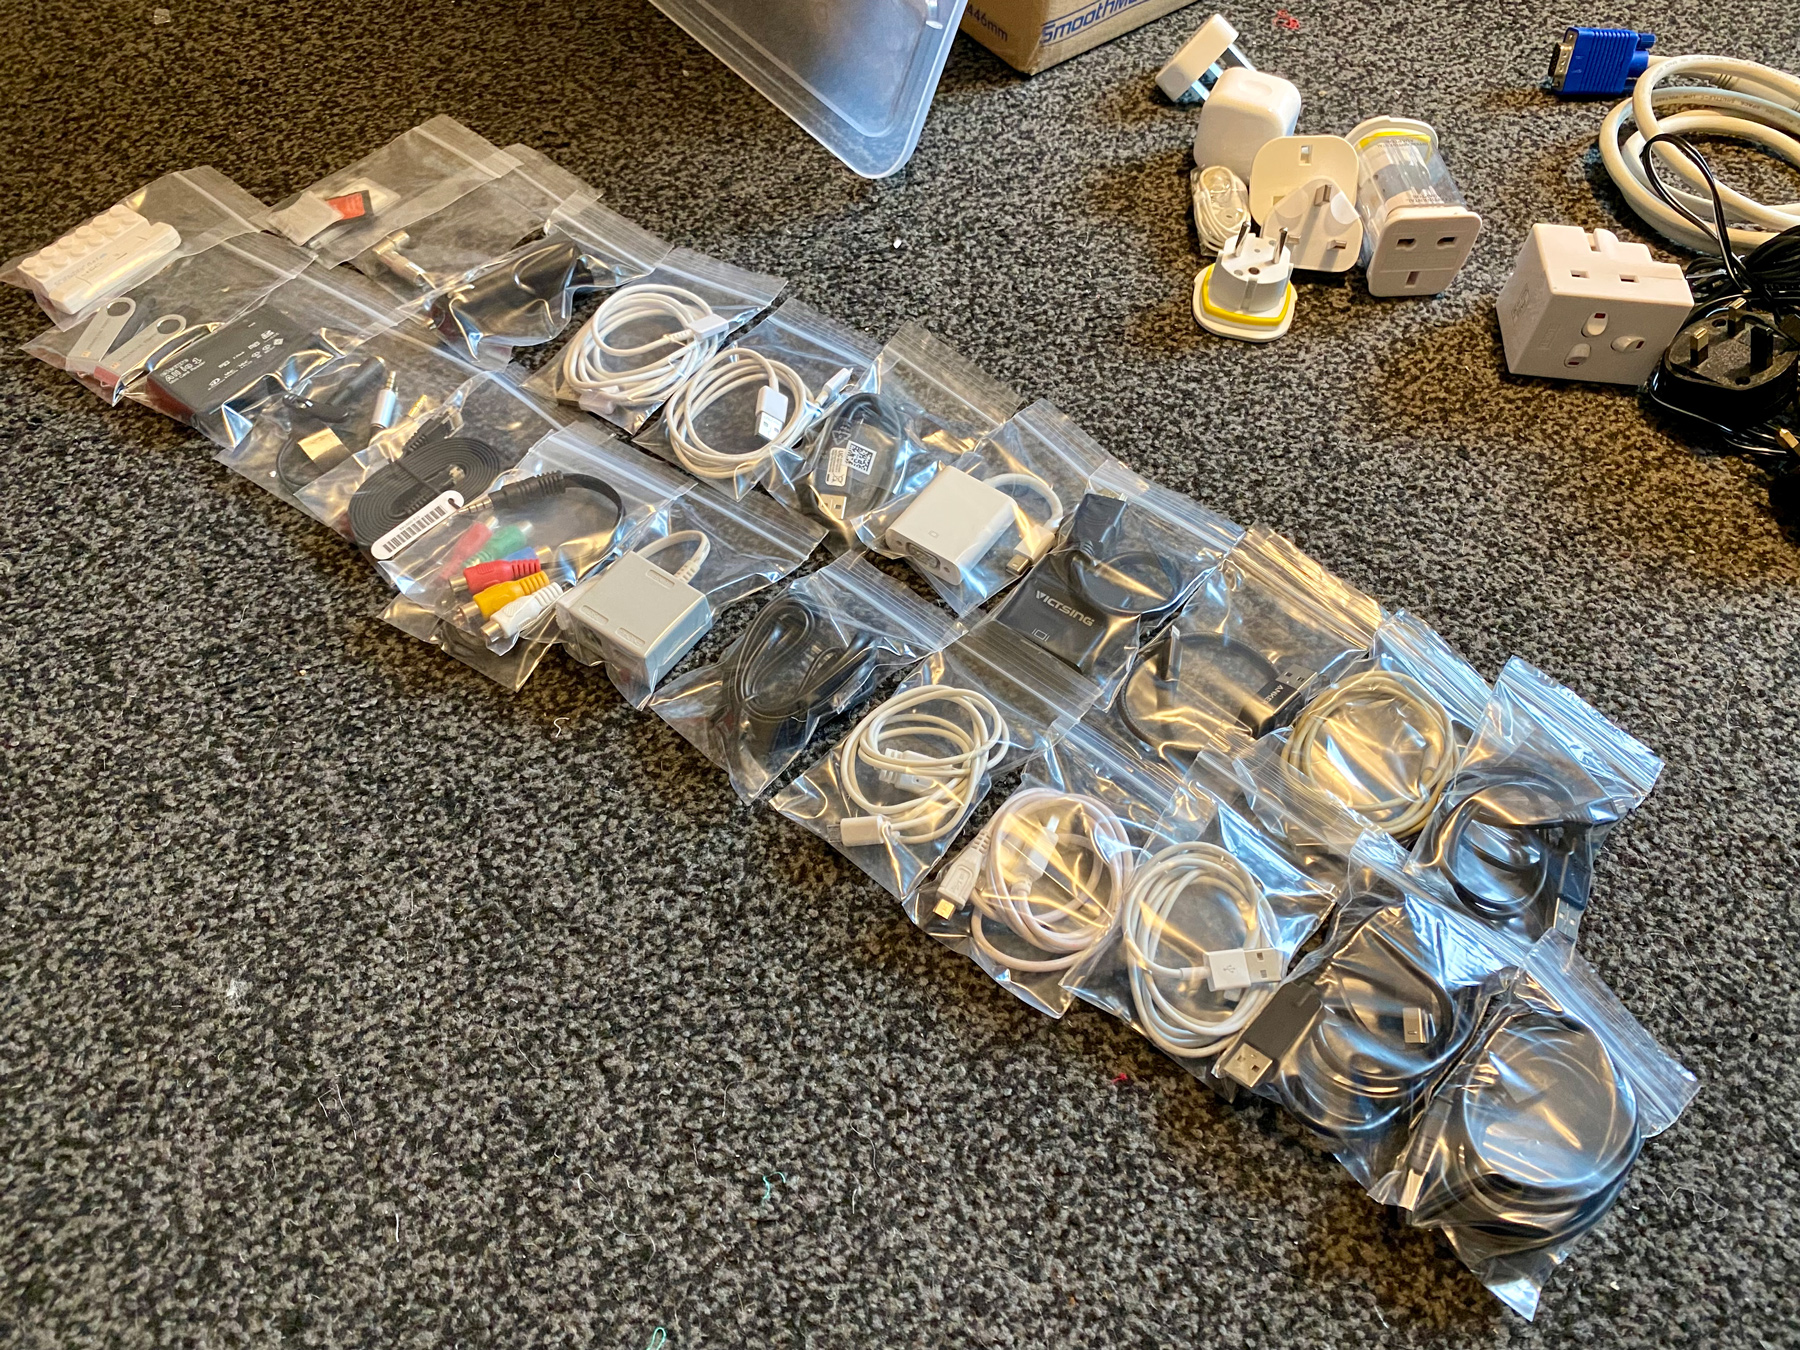 Lots of different cables neatly rolled up in small bags